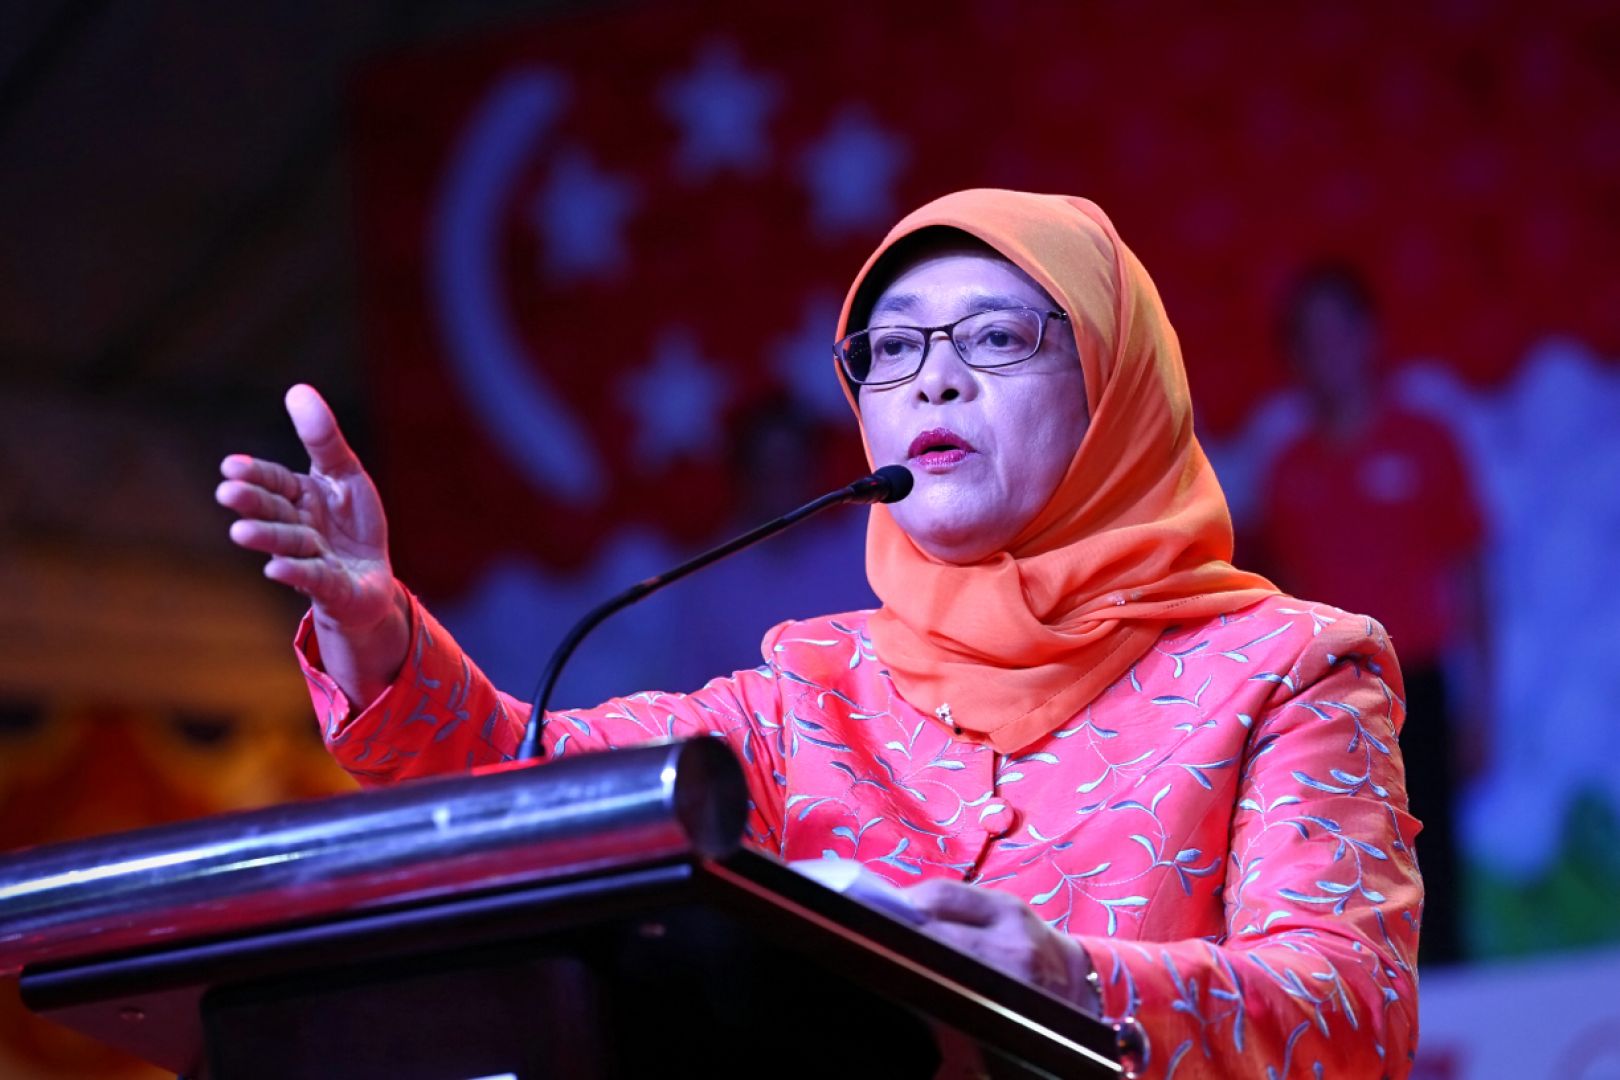 Speaker of Parliament Halimah Yacob has announced that she will run for the highest office in the land, weeks after revealing that she was mulling over contesting next month's Presidential Election. u00e2u20acu201d TODAY pic